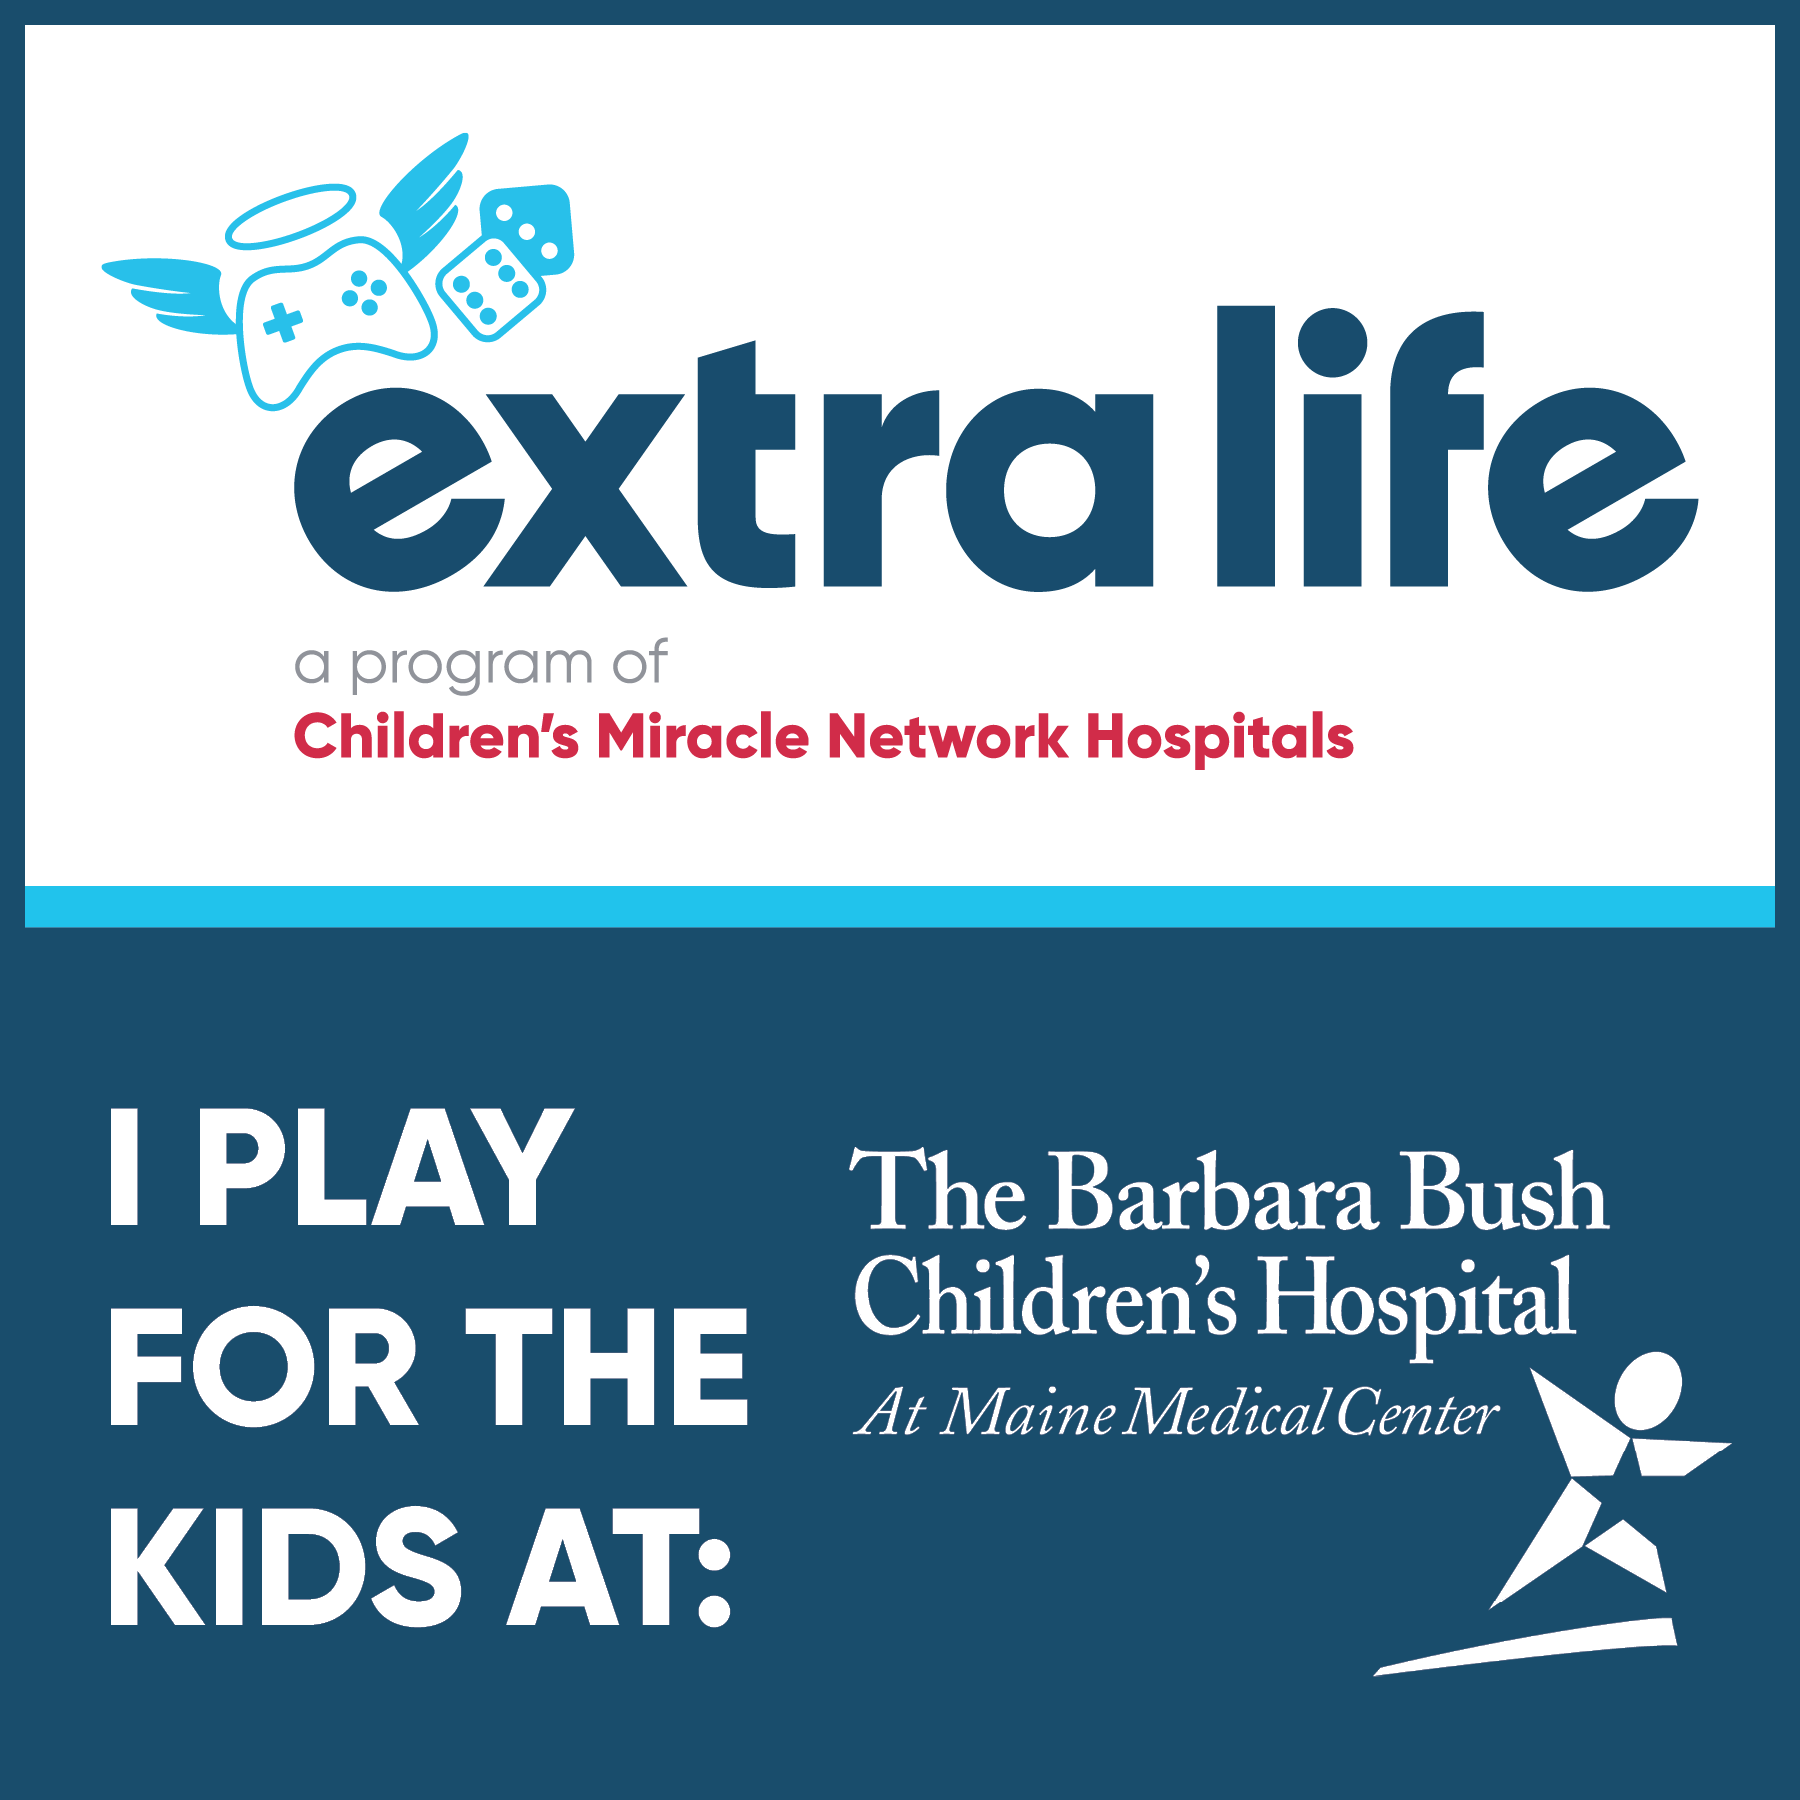 social media sharing image for the extra life charity event to benefit the Barbara Bush Children's Hospital